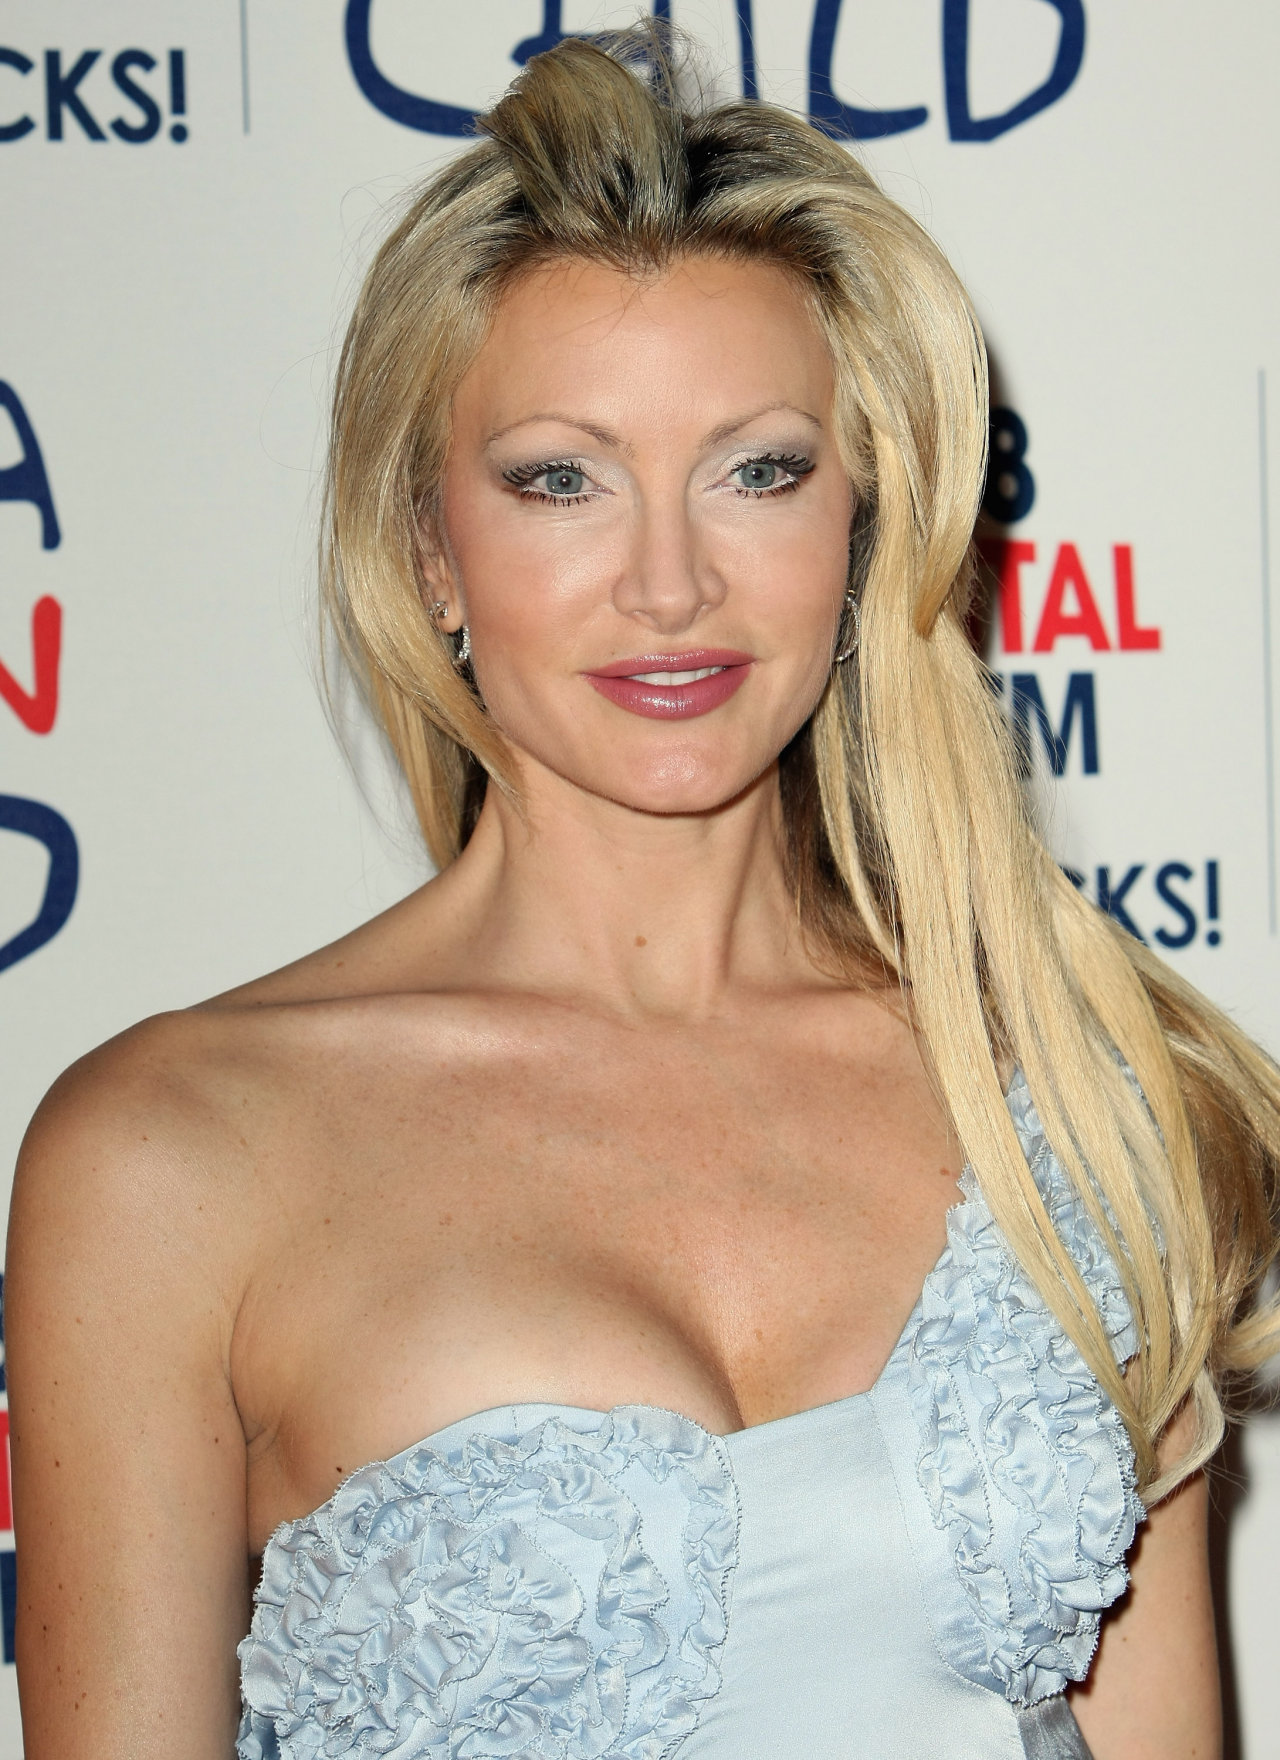 Caprice Bourret leaked wallpapers